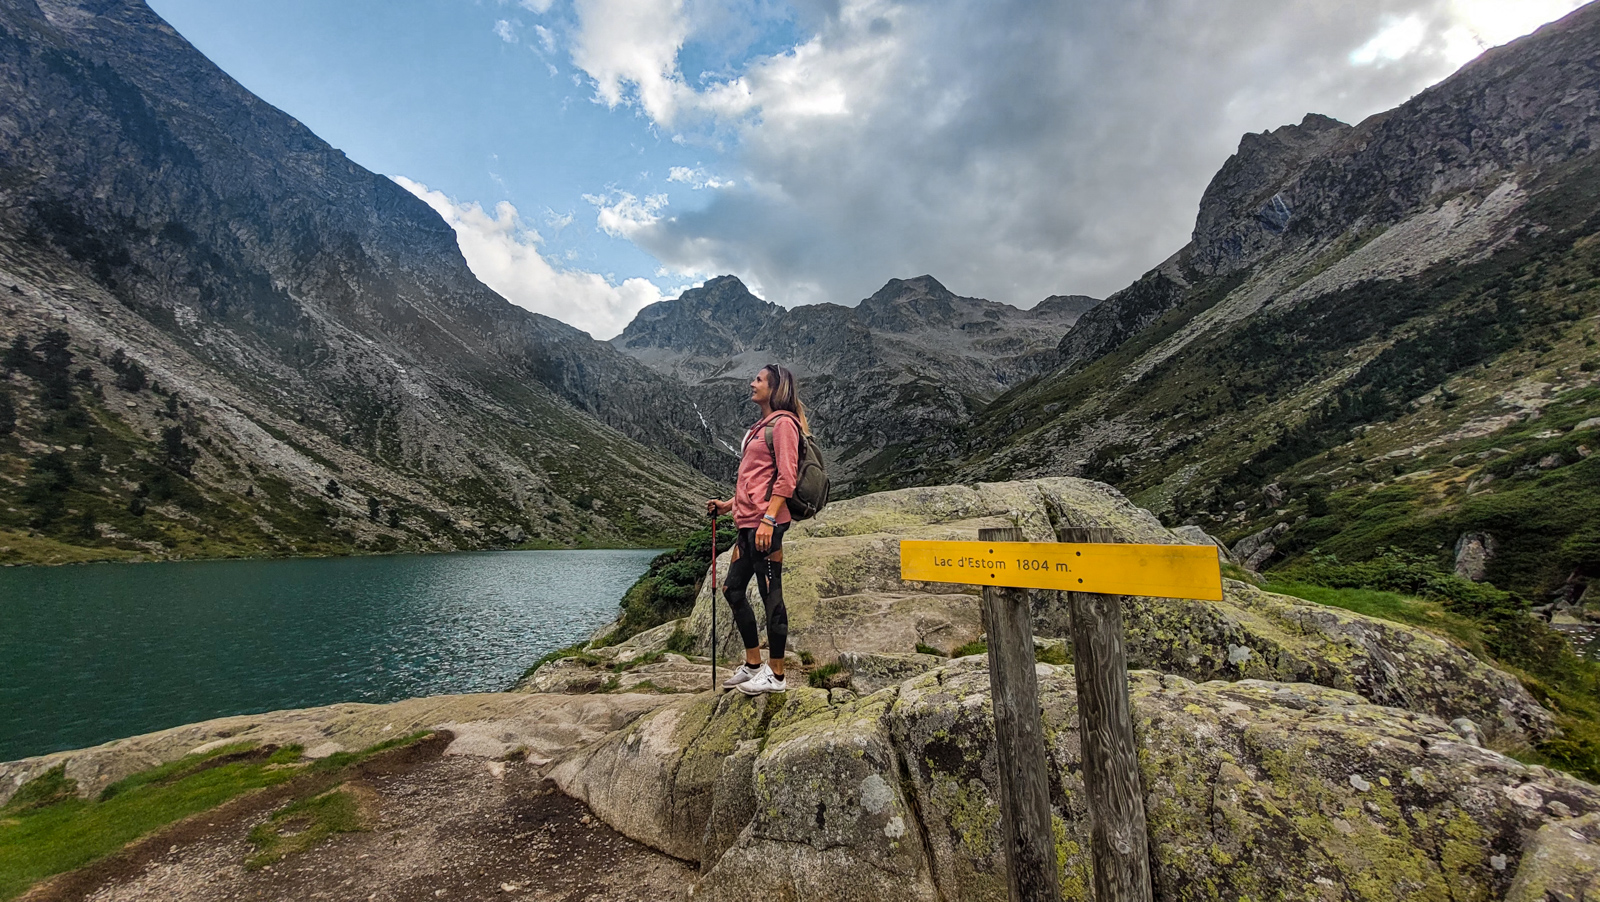 Hike to Lac d'Estom, one of the most beautiful lakes in the Hautes Pyrénées!